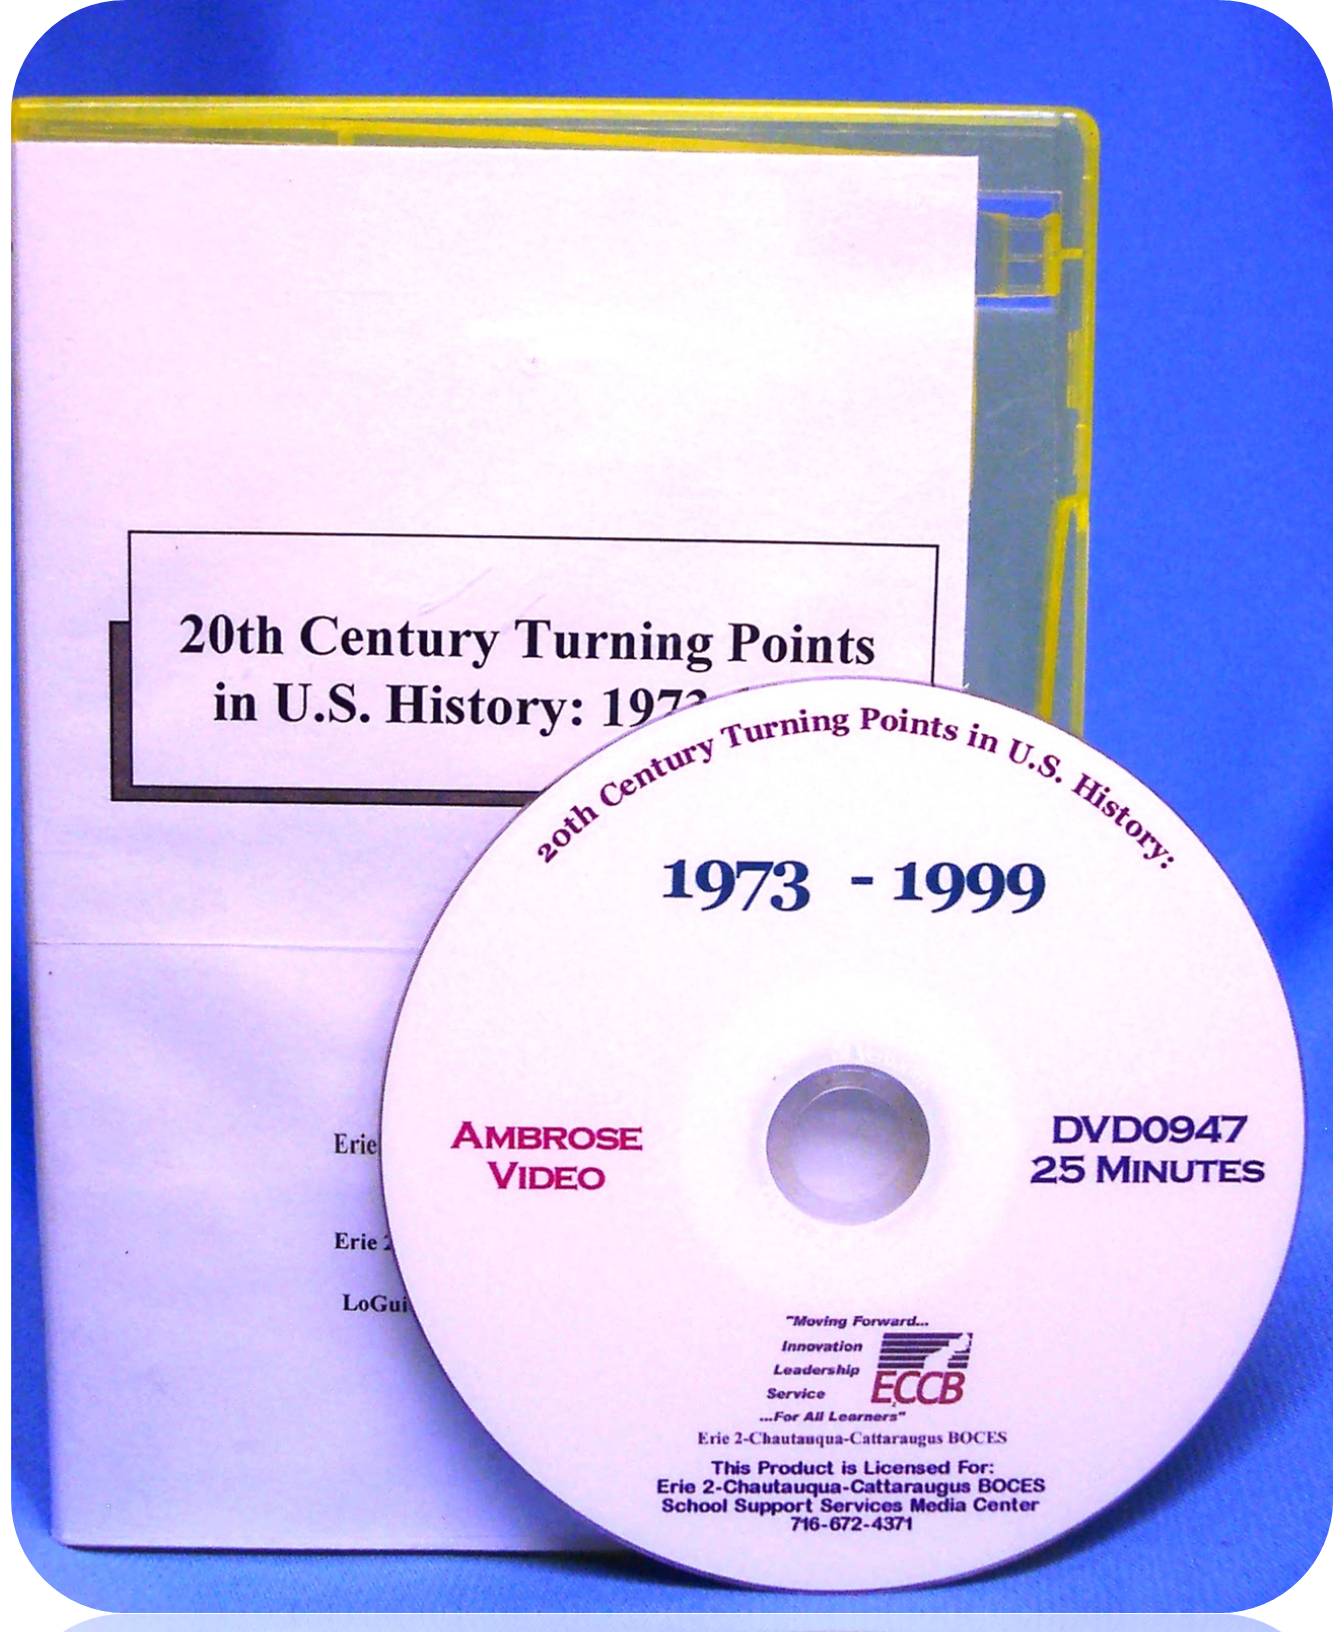 20th Century Turning Points in U.S. History: 1973-1999